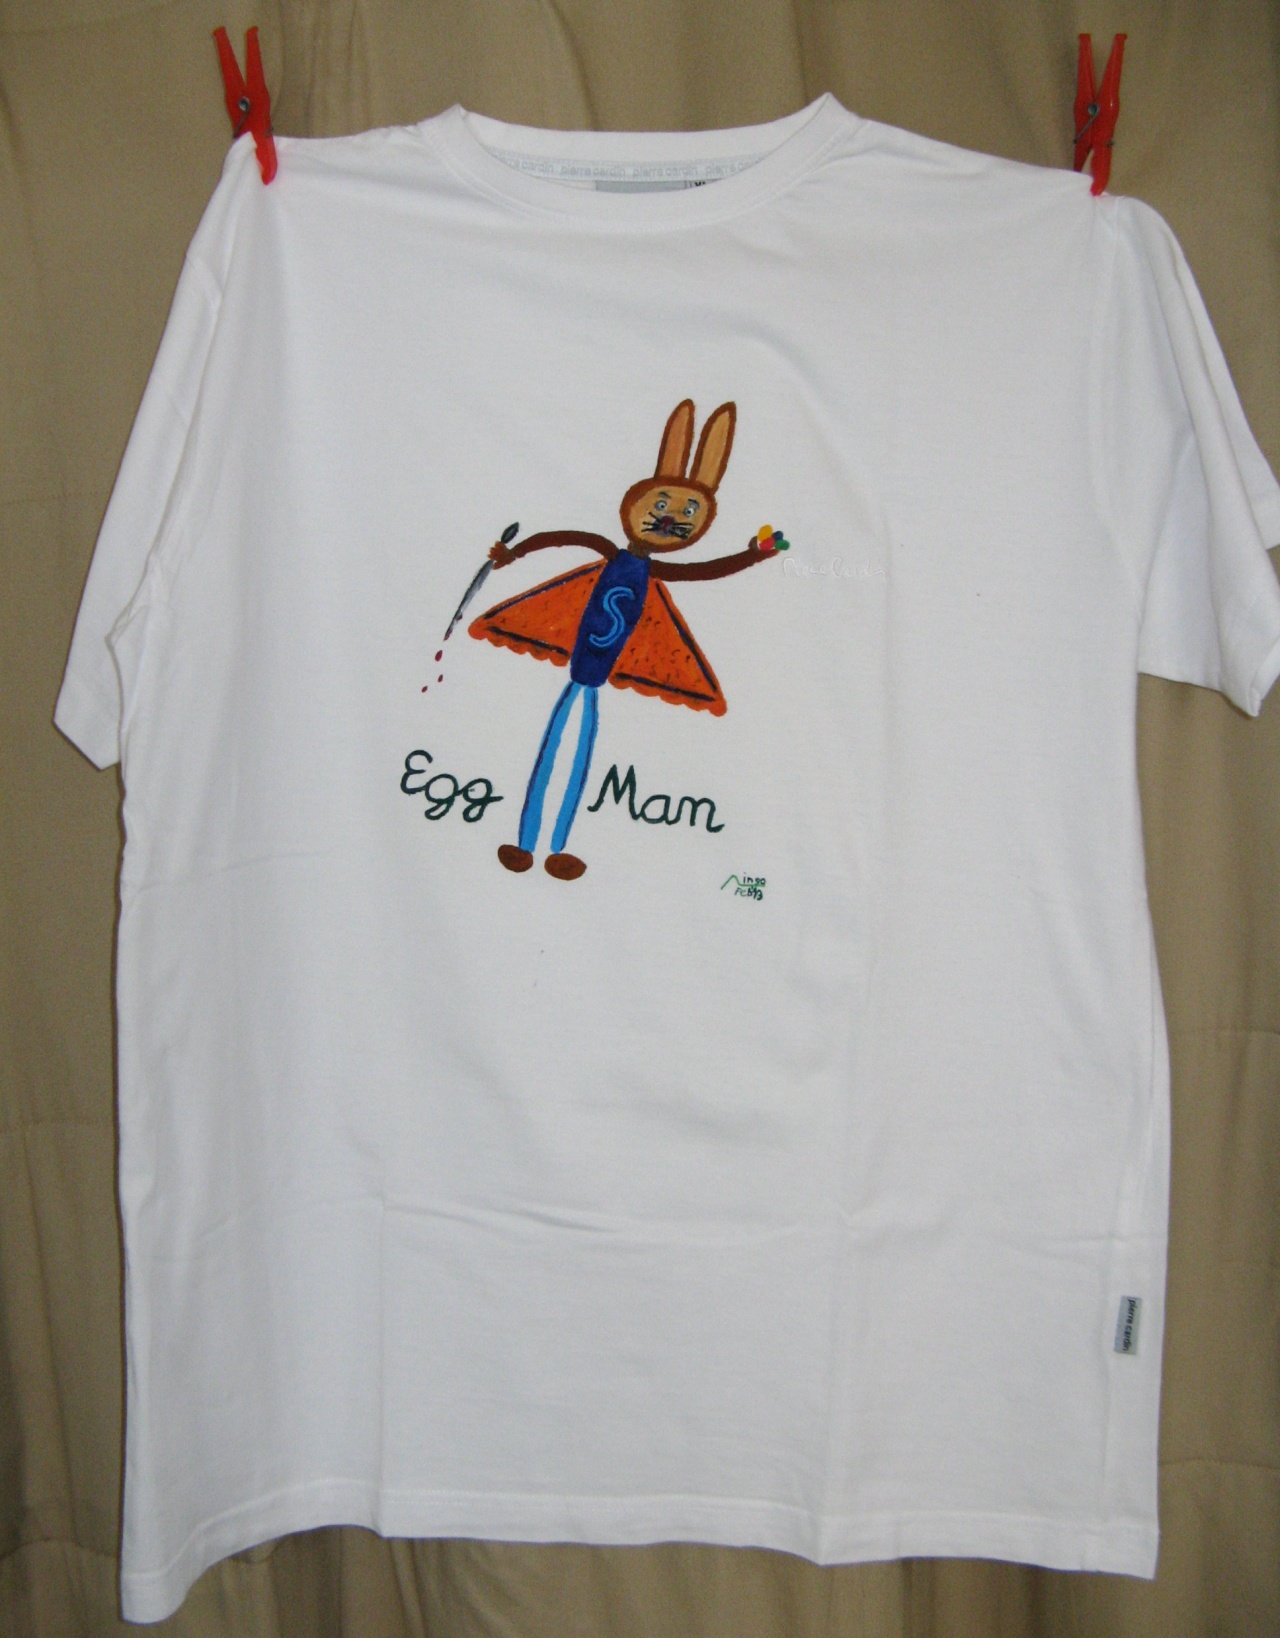 Egg Man overview